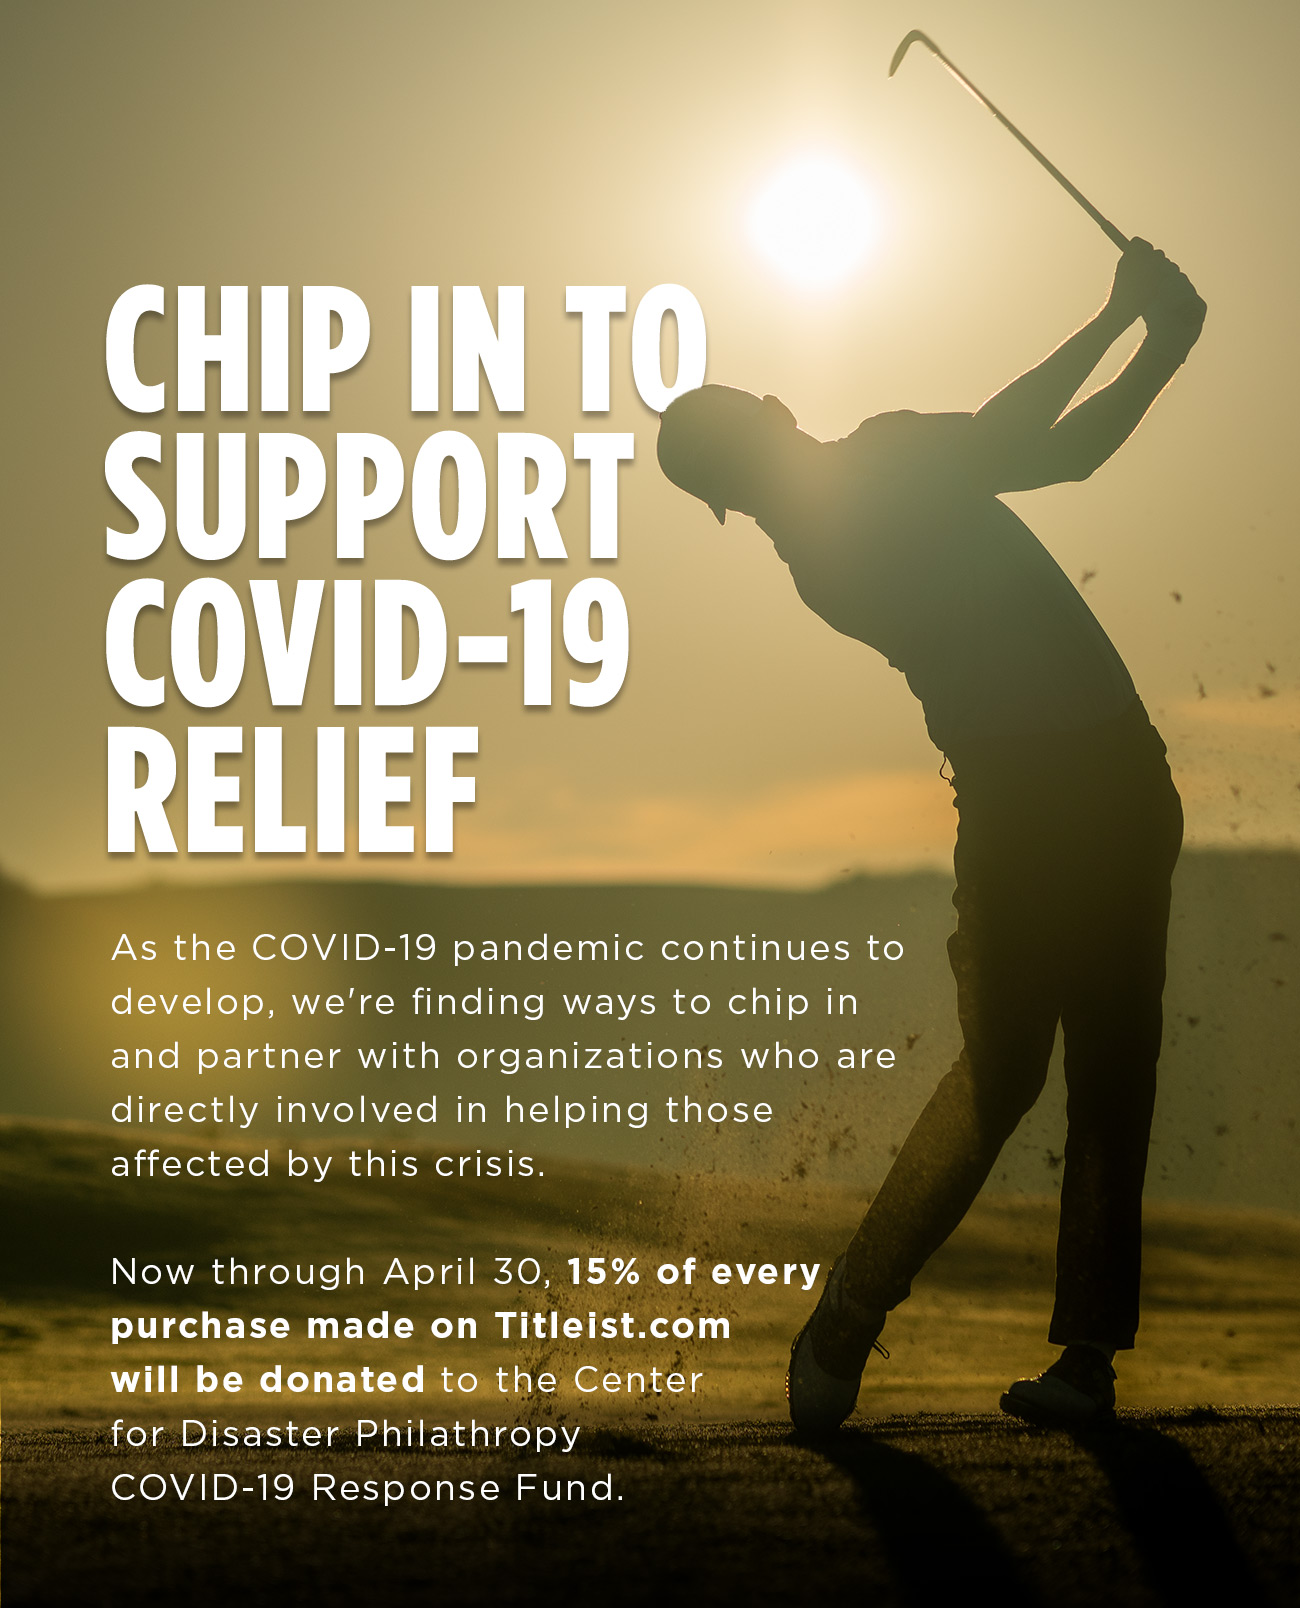 Chip In to Support COVID-19 Relief